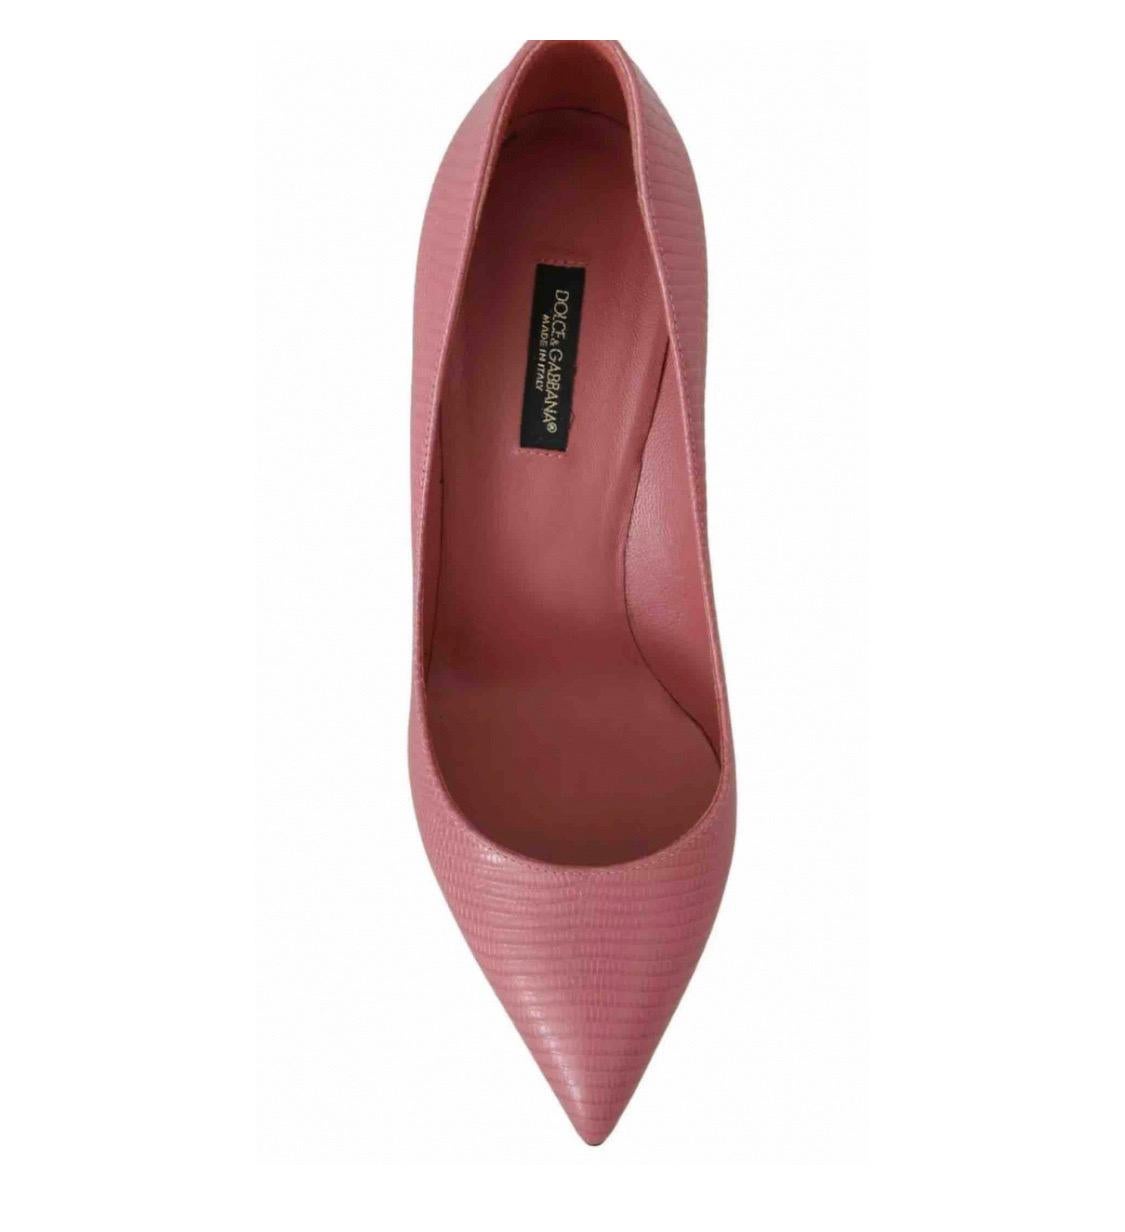 Women's Dolce & Gabbana pink leather pointed toes heels pumps shoes For Sale